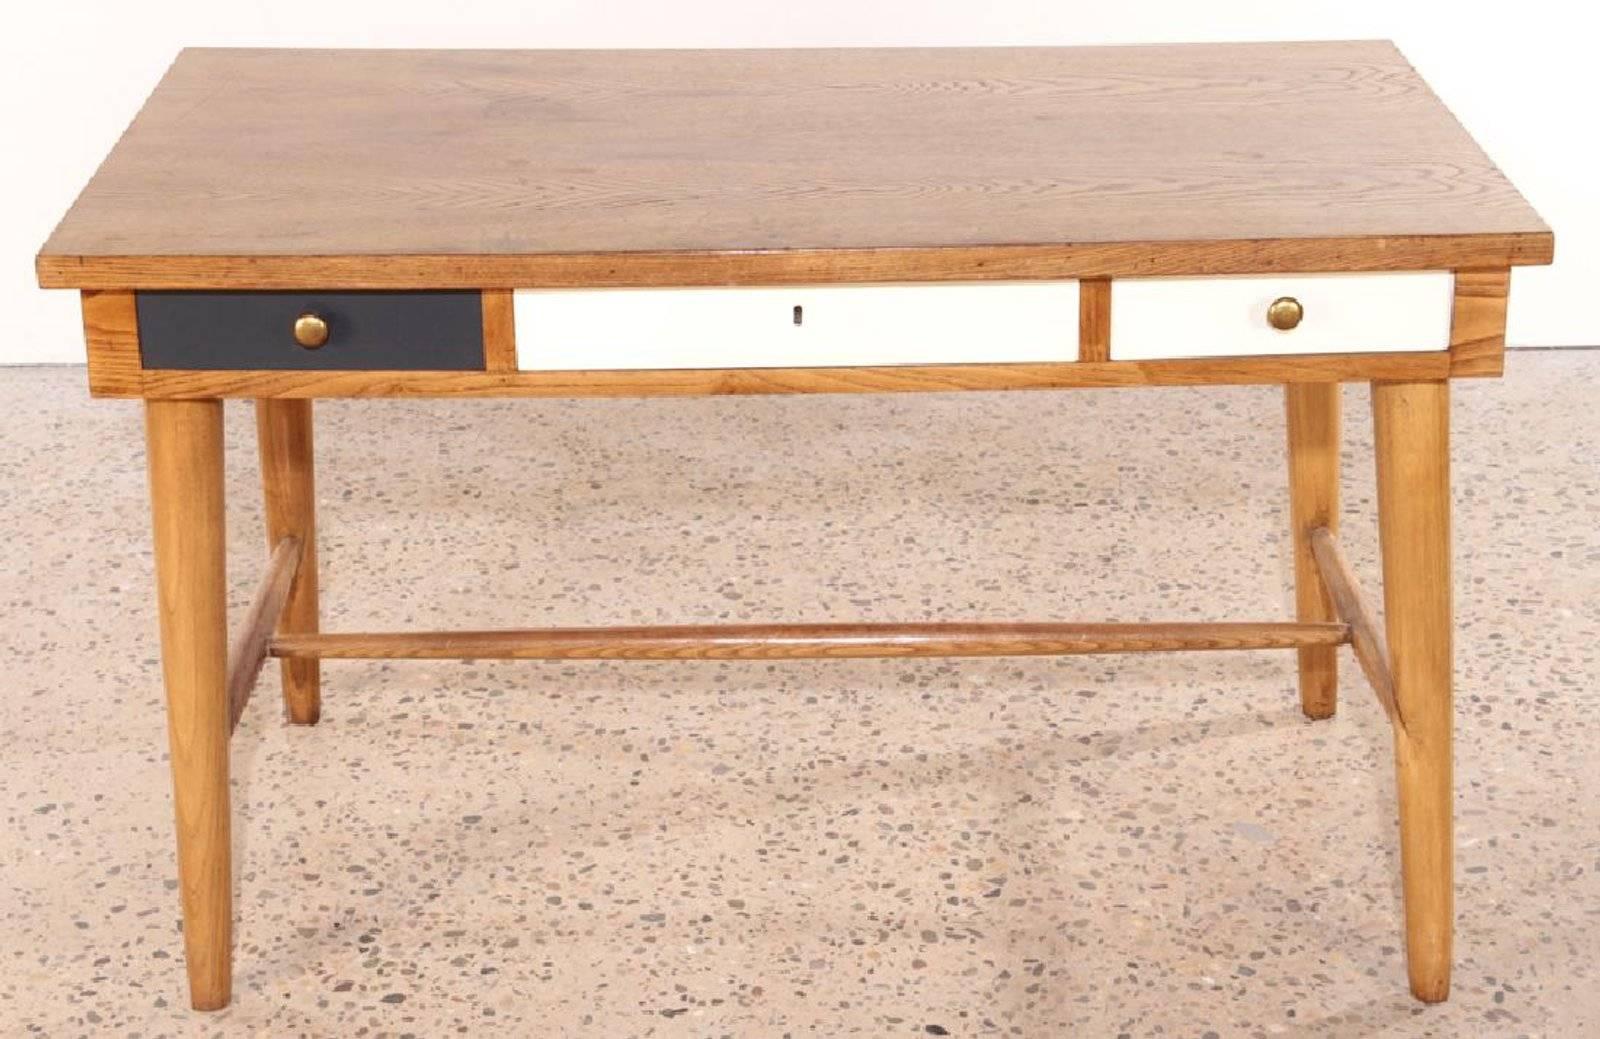 This unique Italian writing table in the manner Gio Ponti, is made of oak and features three drawers, one black and two white. A very stylish piece.  Surface of desk is worn.

Measure: 27.75